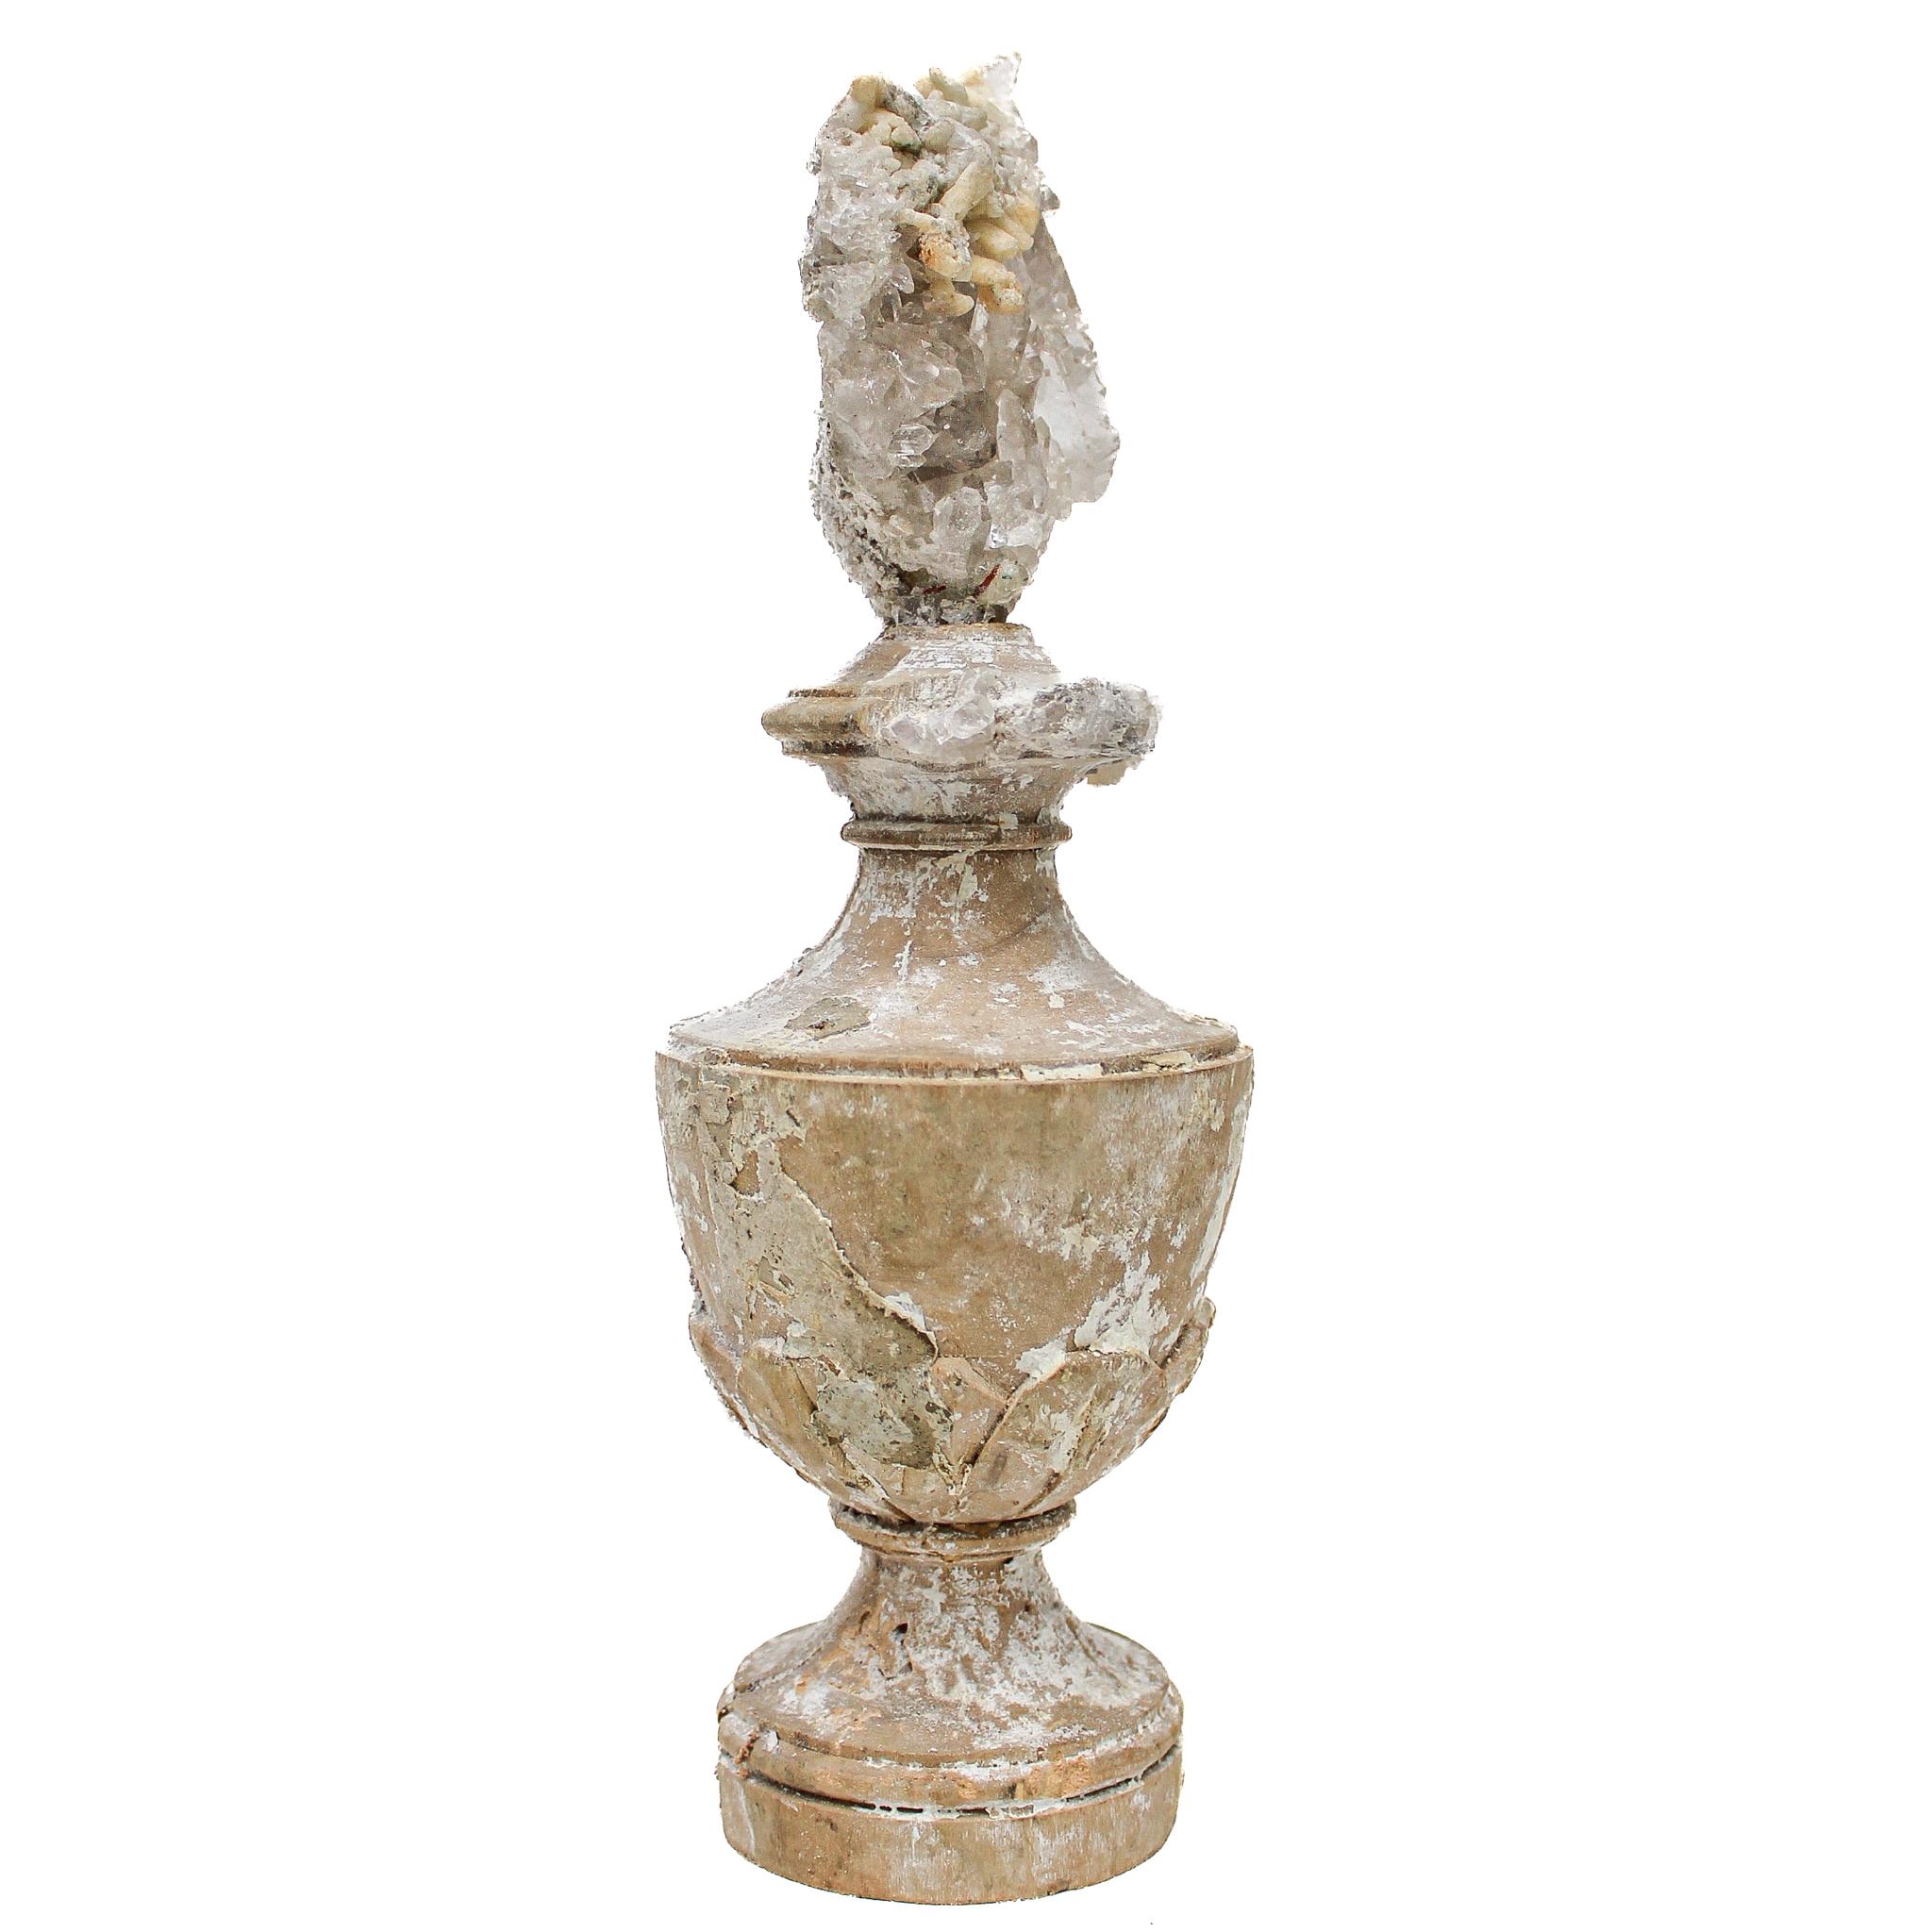 Hand-Carved 17th Century 'Florence Fragment' Vase with a Crystal Quartz Cluster with Calcite